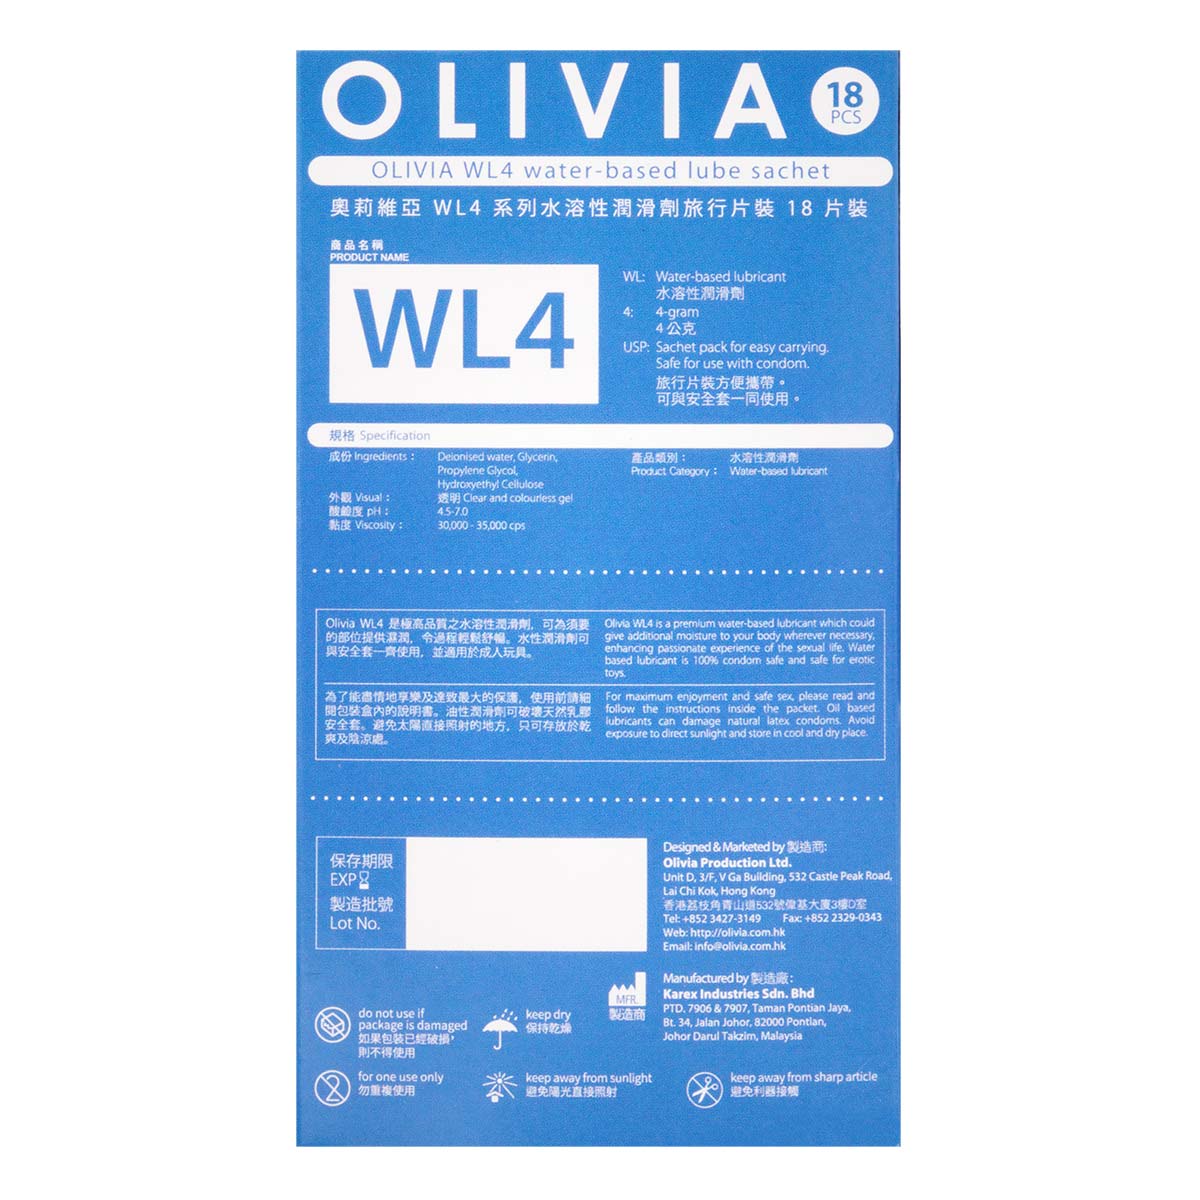 Olivia The East Pure 4g (sachet) 18 pieces Water-based Lubricant-p_3